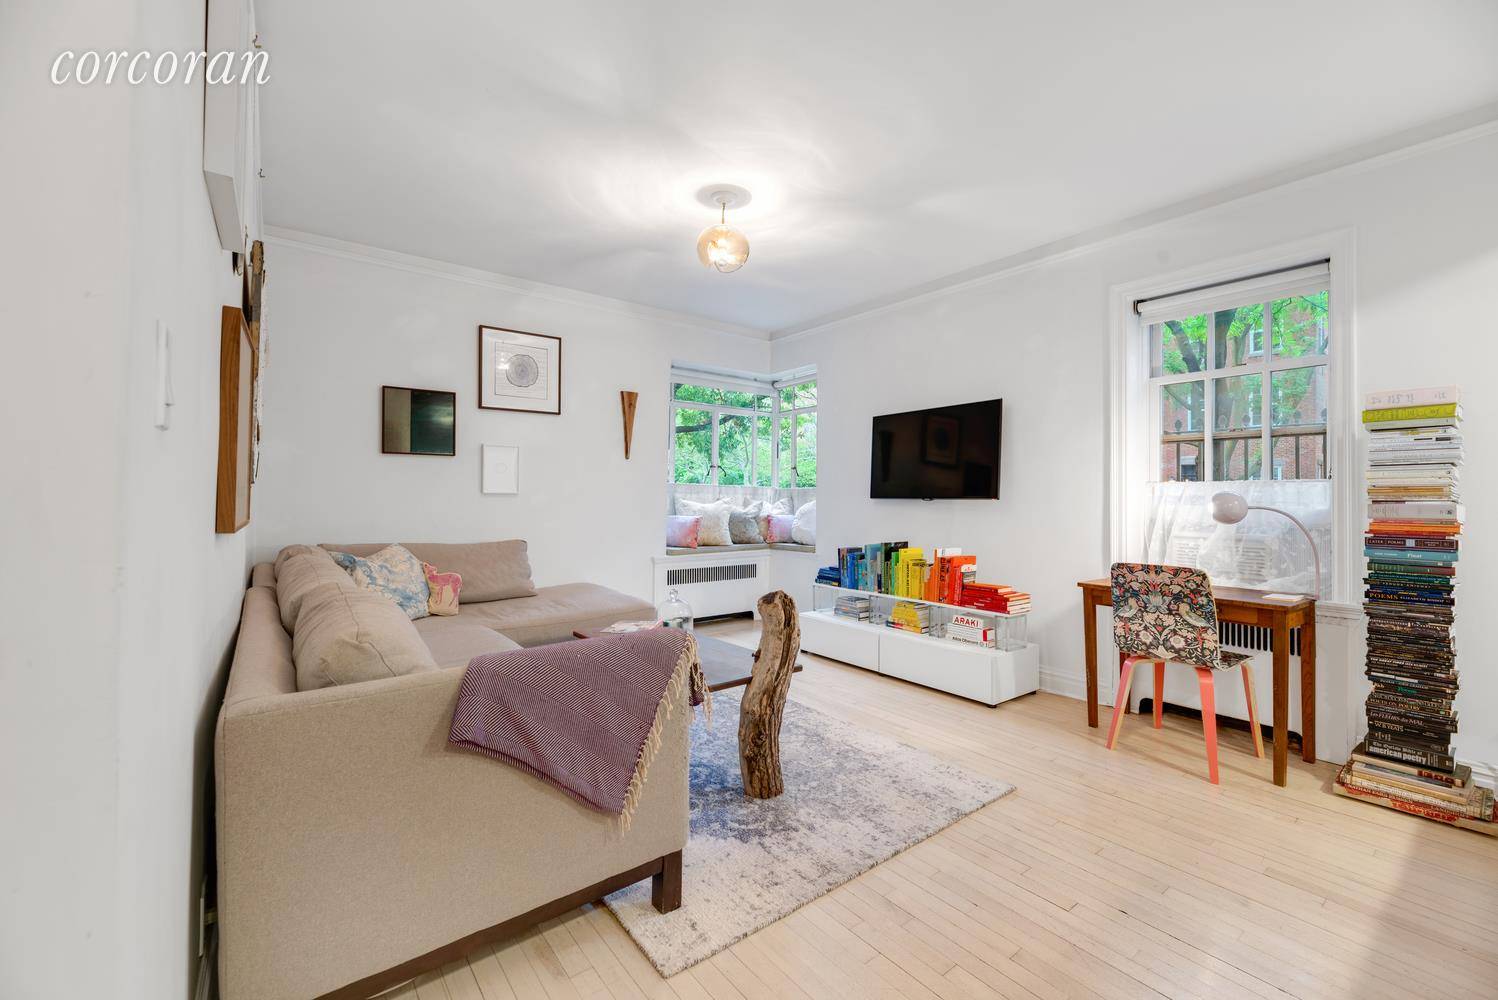 Sun drenched and serene, this thoughtfully renovated, impeccably appointed, elevated above street level, alcove studio offers gorgeous finishes and a coveted West Village location.